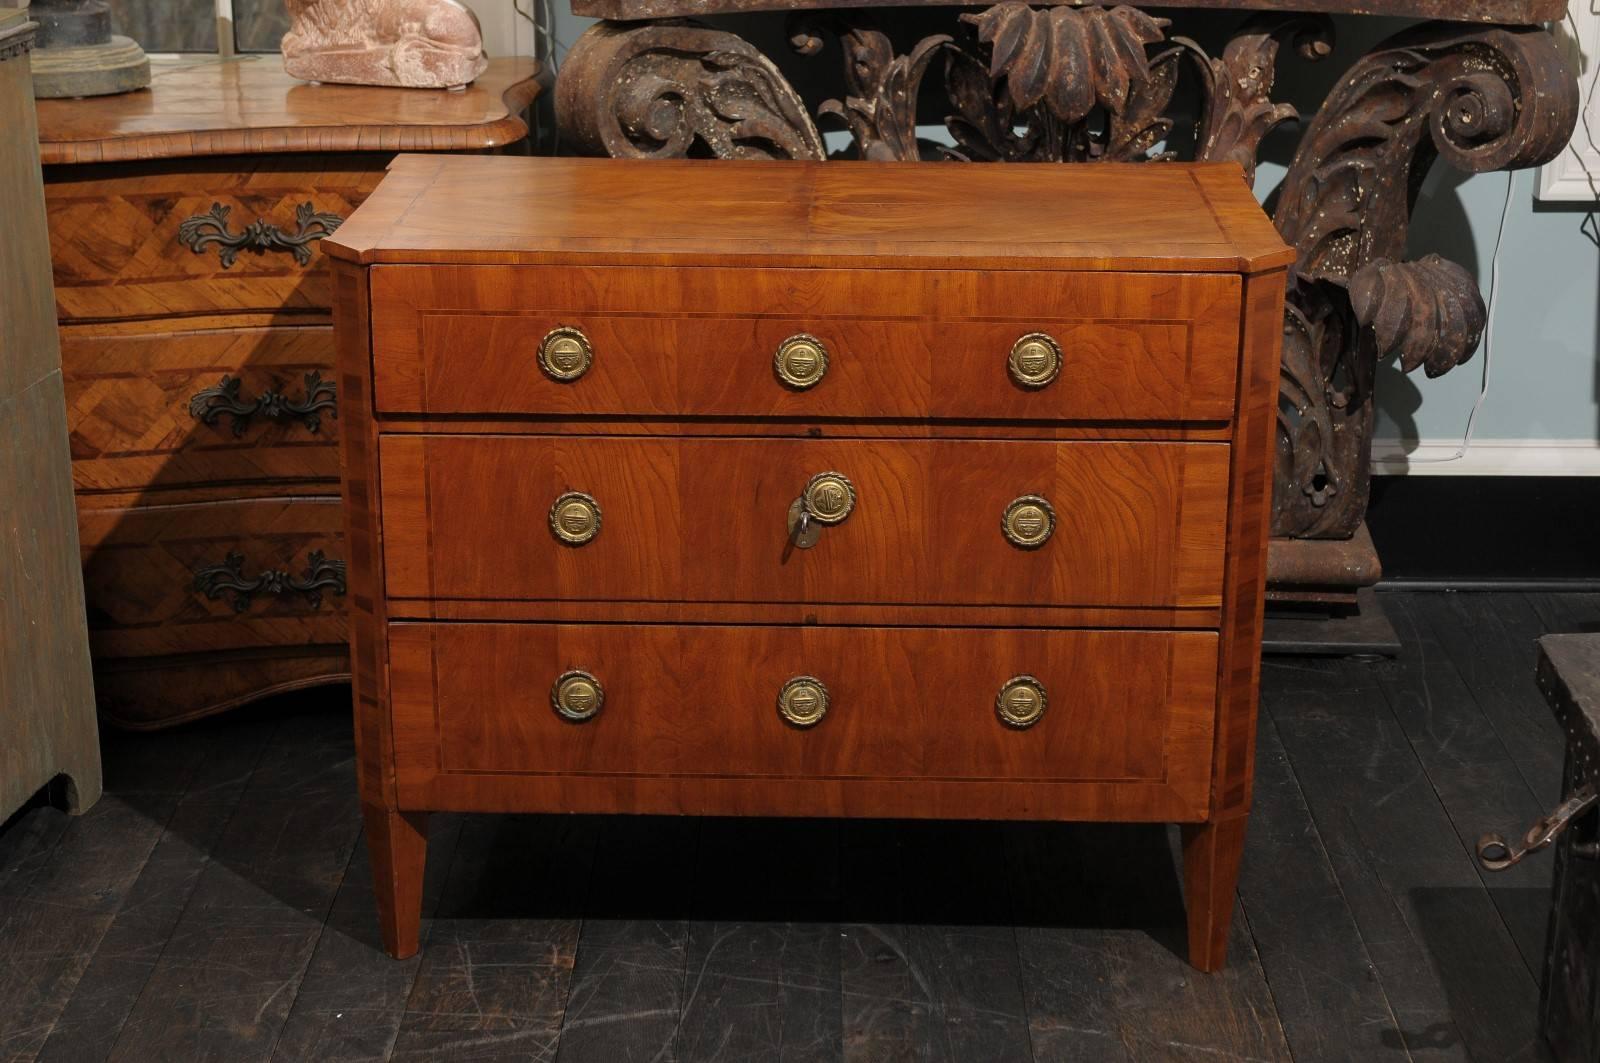 A Swedish period Gustavian 18th century three-drawer chest. This Swedish chest from circa 1780 features three dovetailed drawers with round harware with ring pulls. The keyholes are hidden behind the round escutcheons in the center. This Swedish